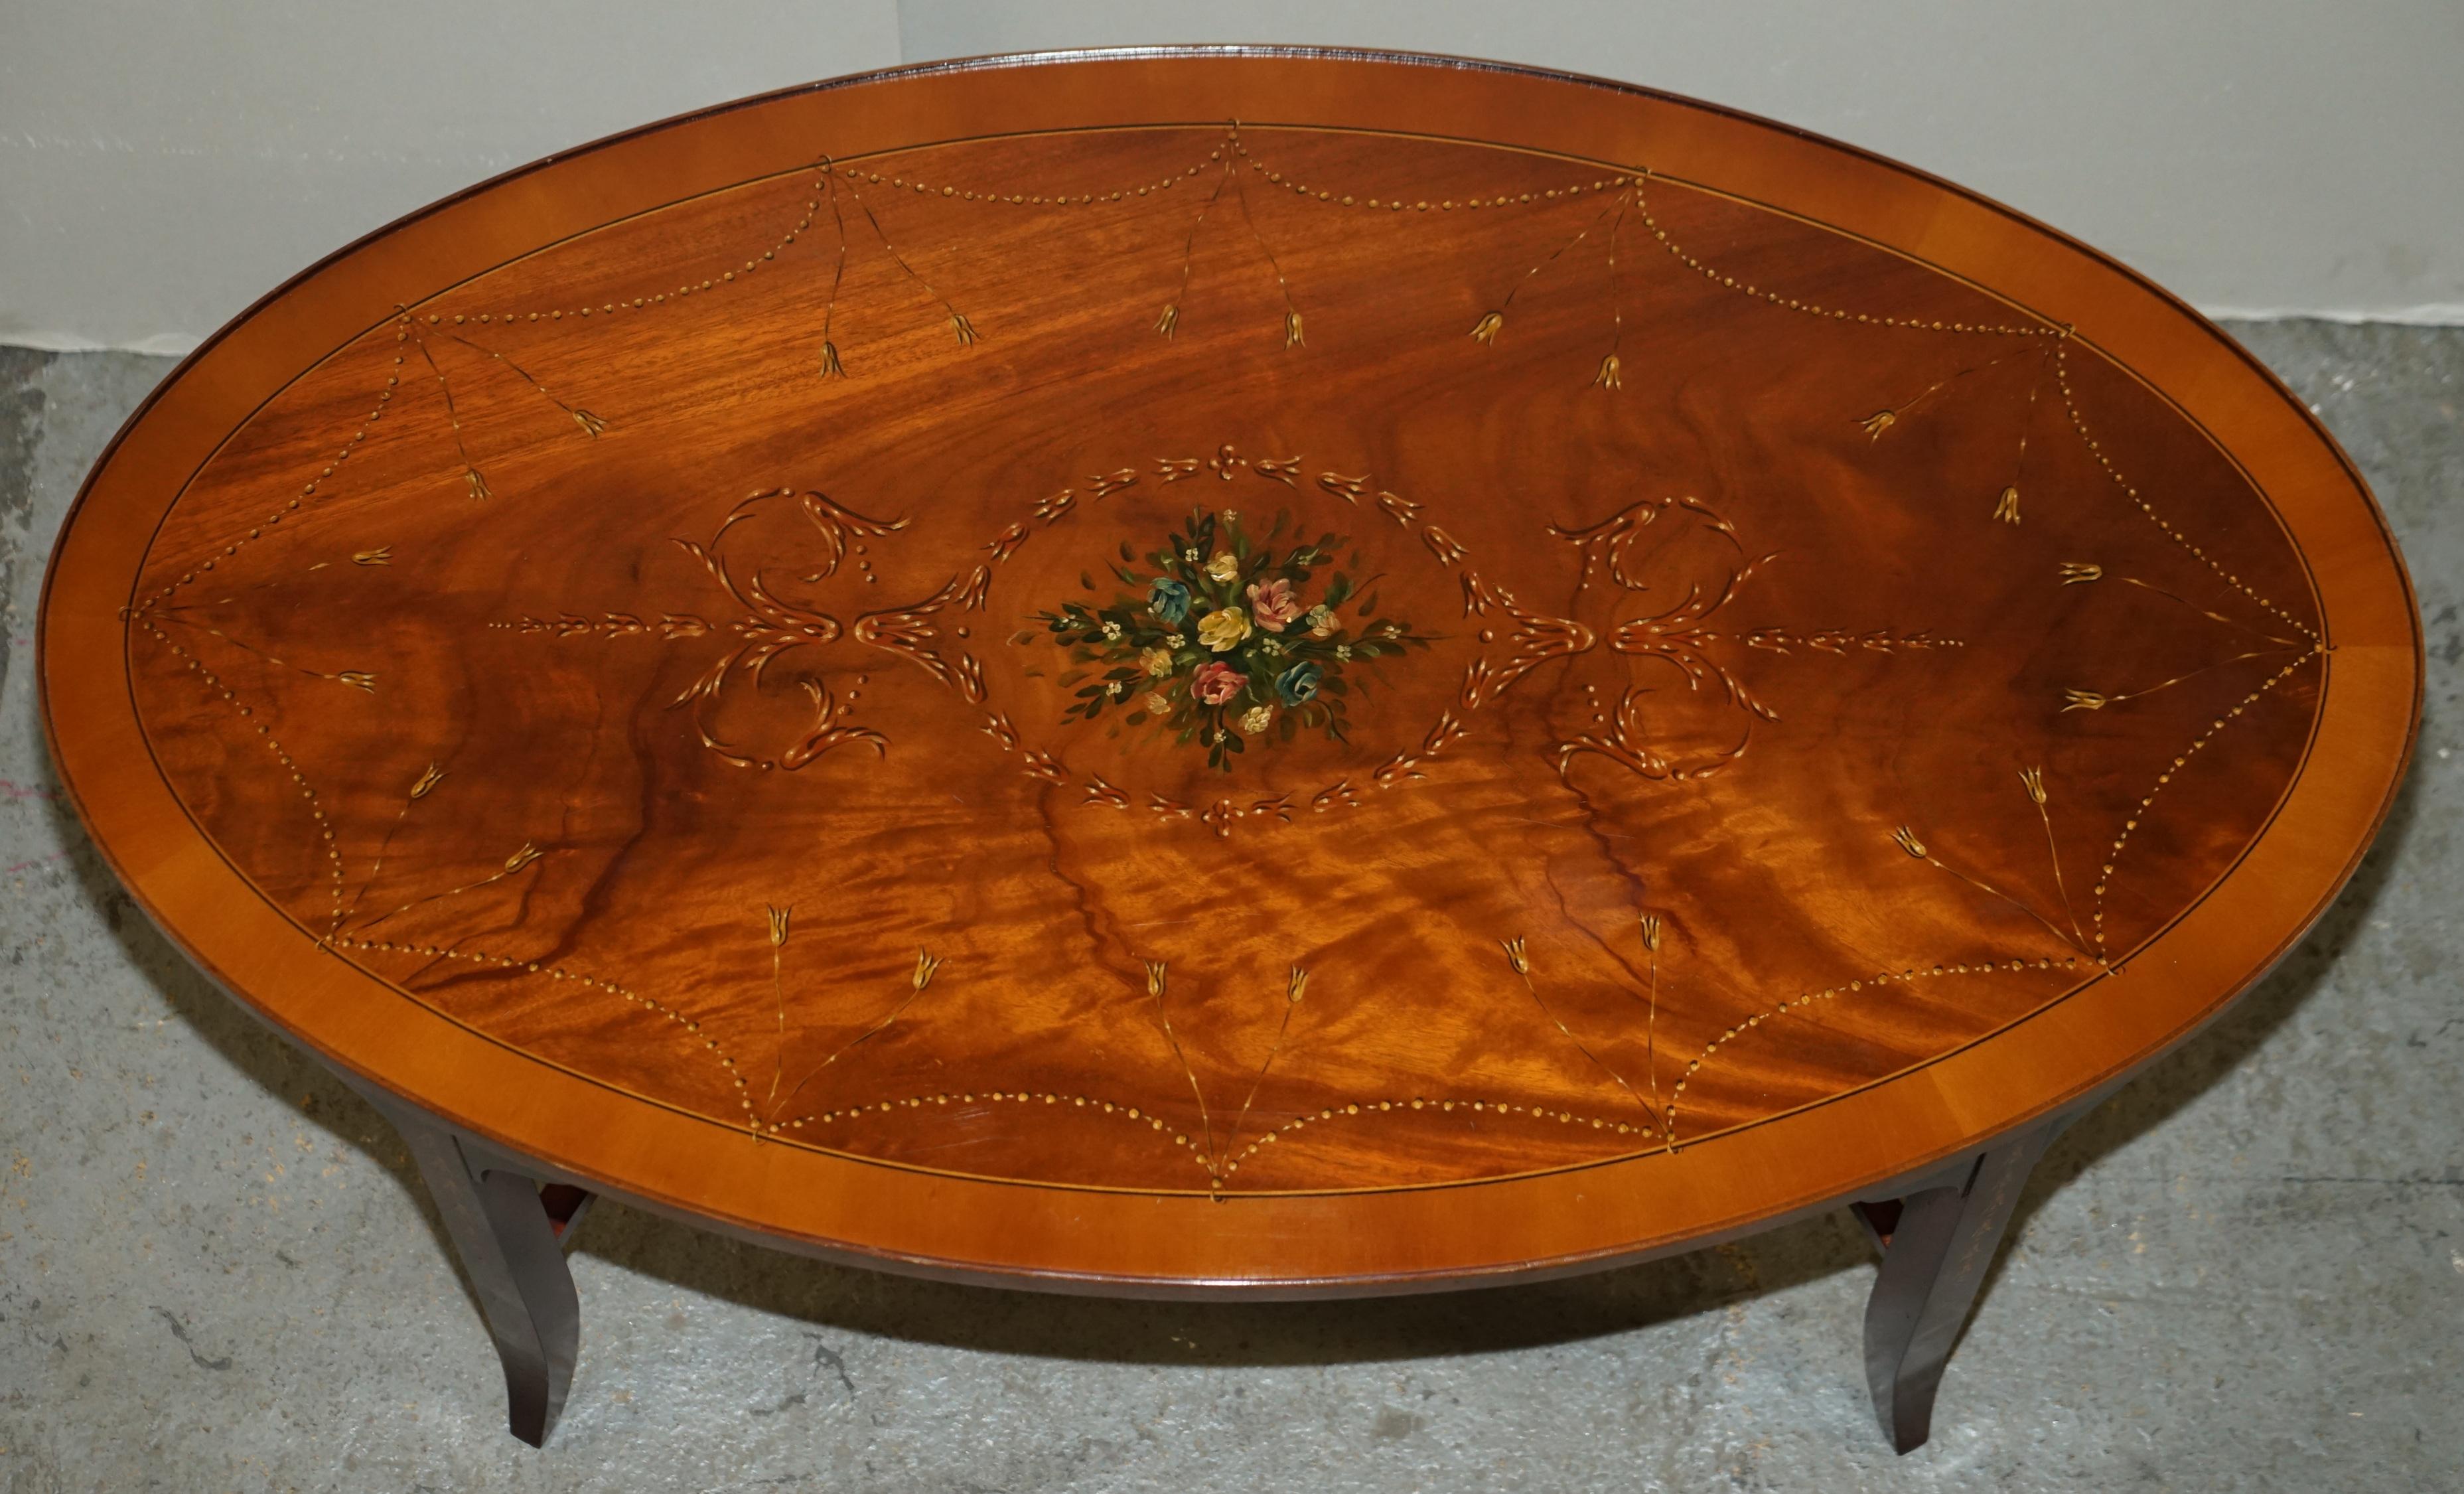 Stunning Oval Hardwood Coffee Table With Splayed Legs Decorative Floral Detail 3